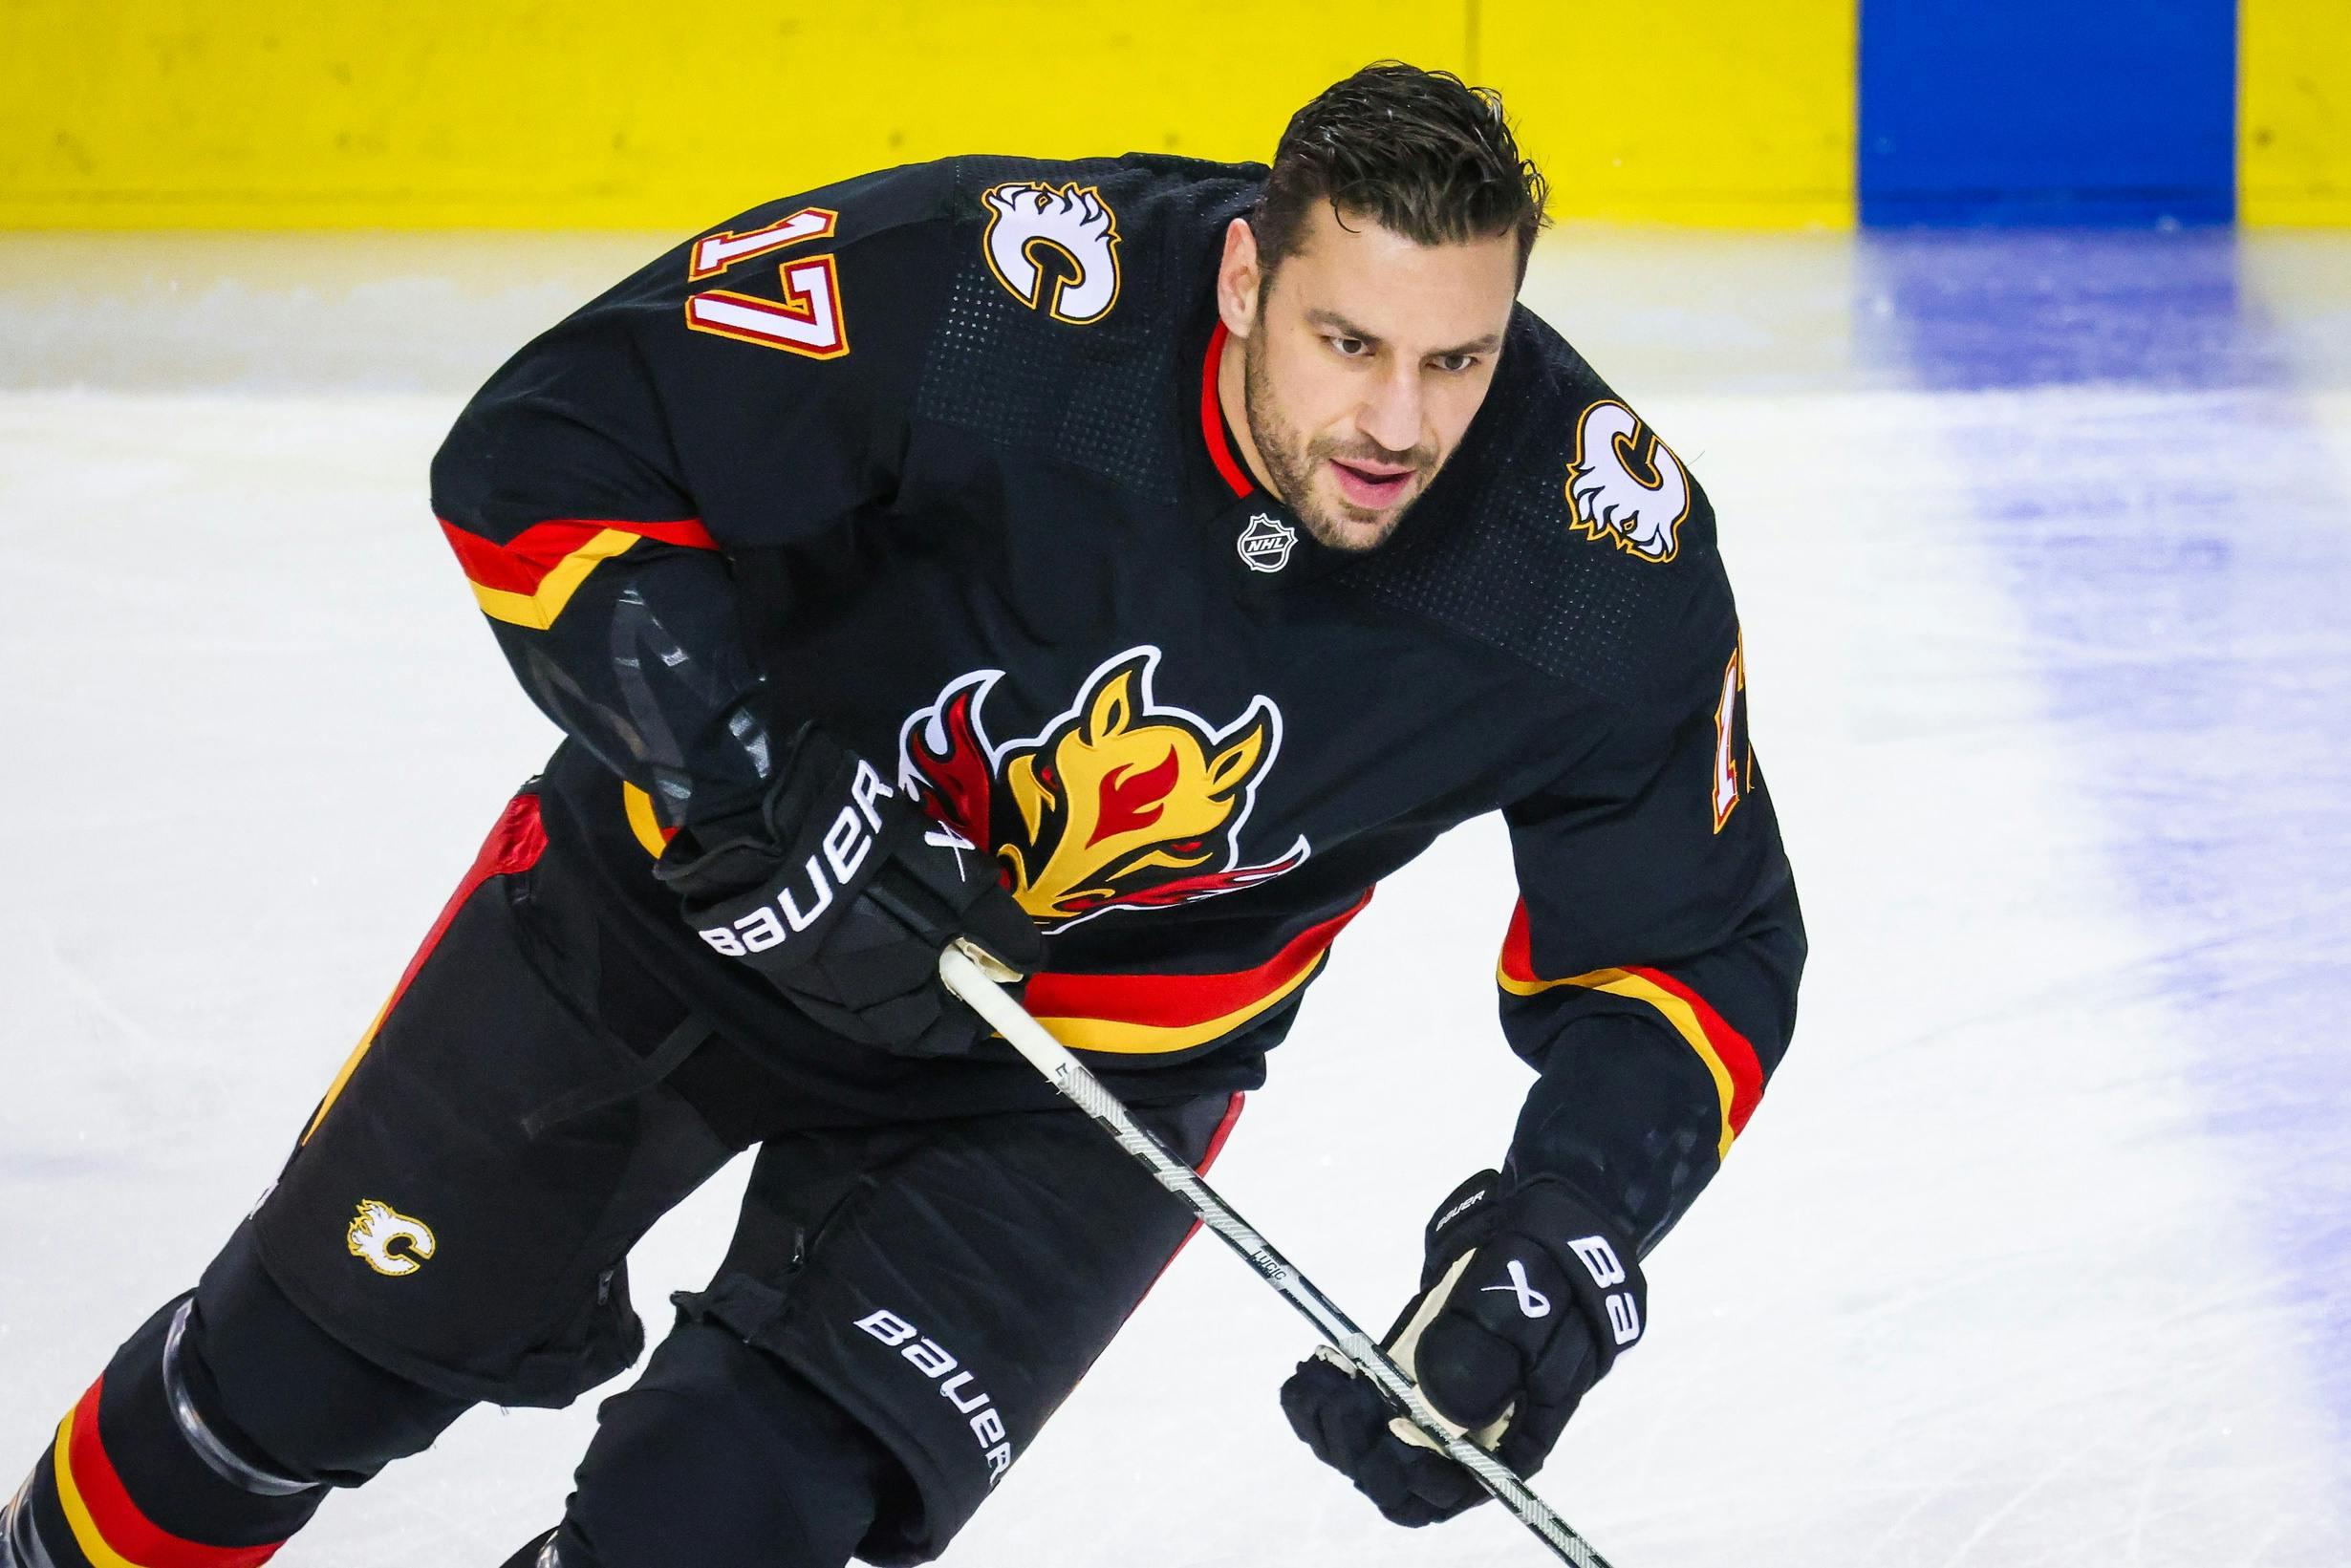 Calgary Flames forward Milan Lucic wants you to vote him into the NHL